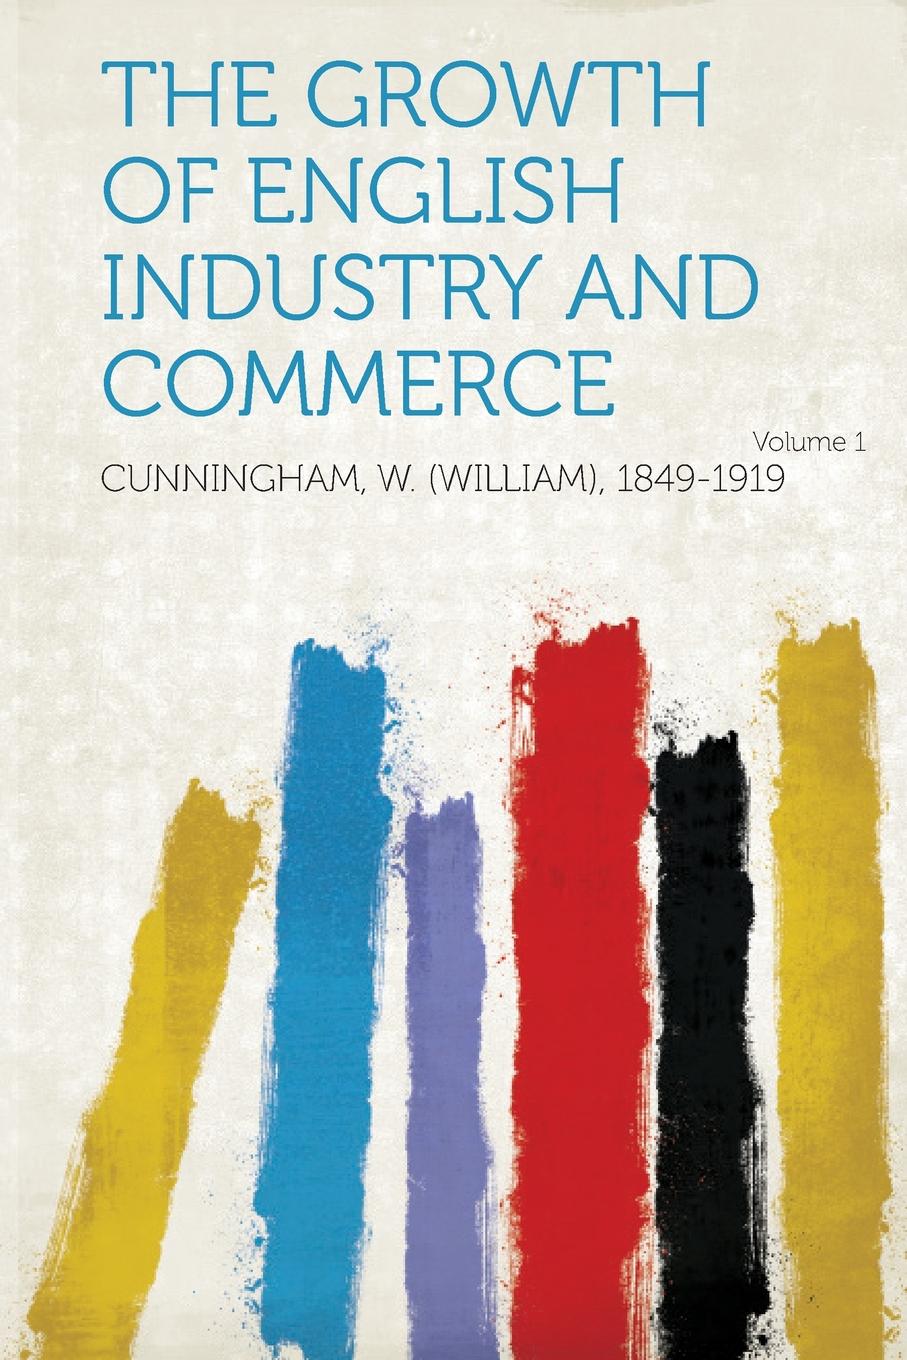 The Growth of English Industry and Commerce Volume 1